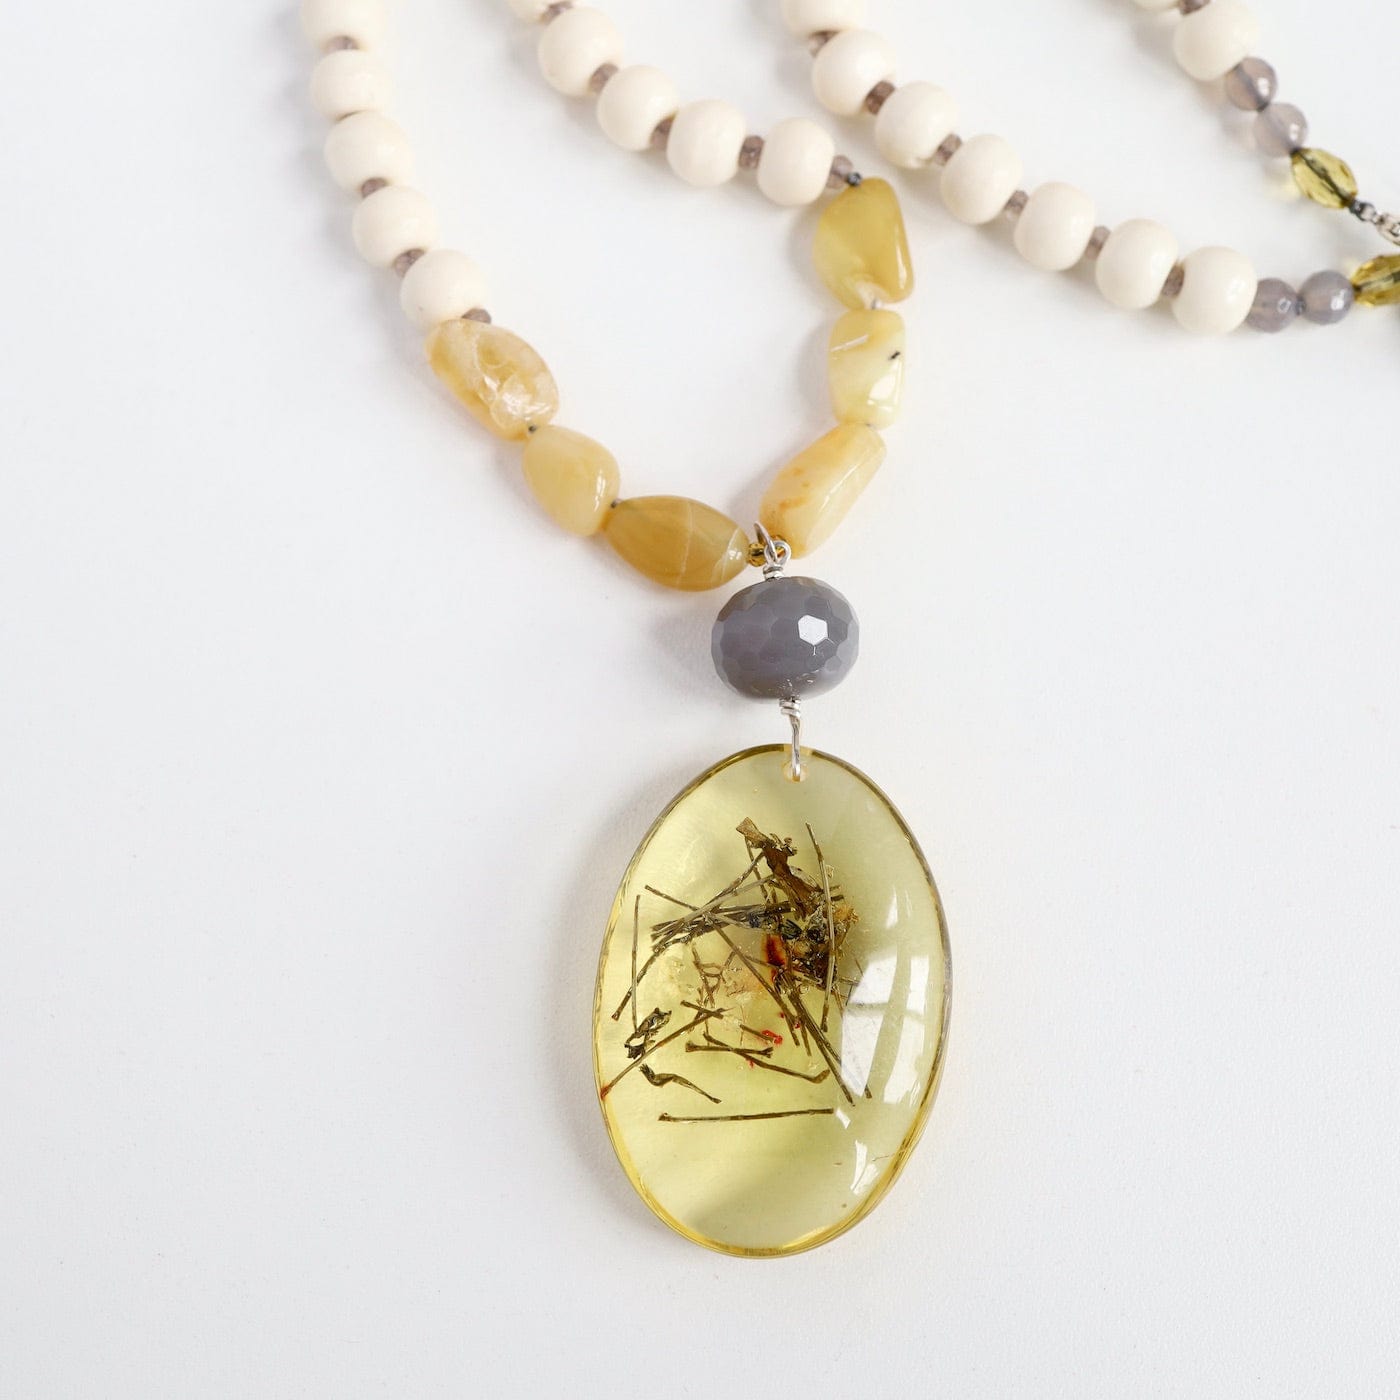 NKL Bone & Yellow Jade Necklace with Amber Pendant Necklace